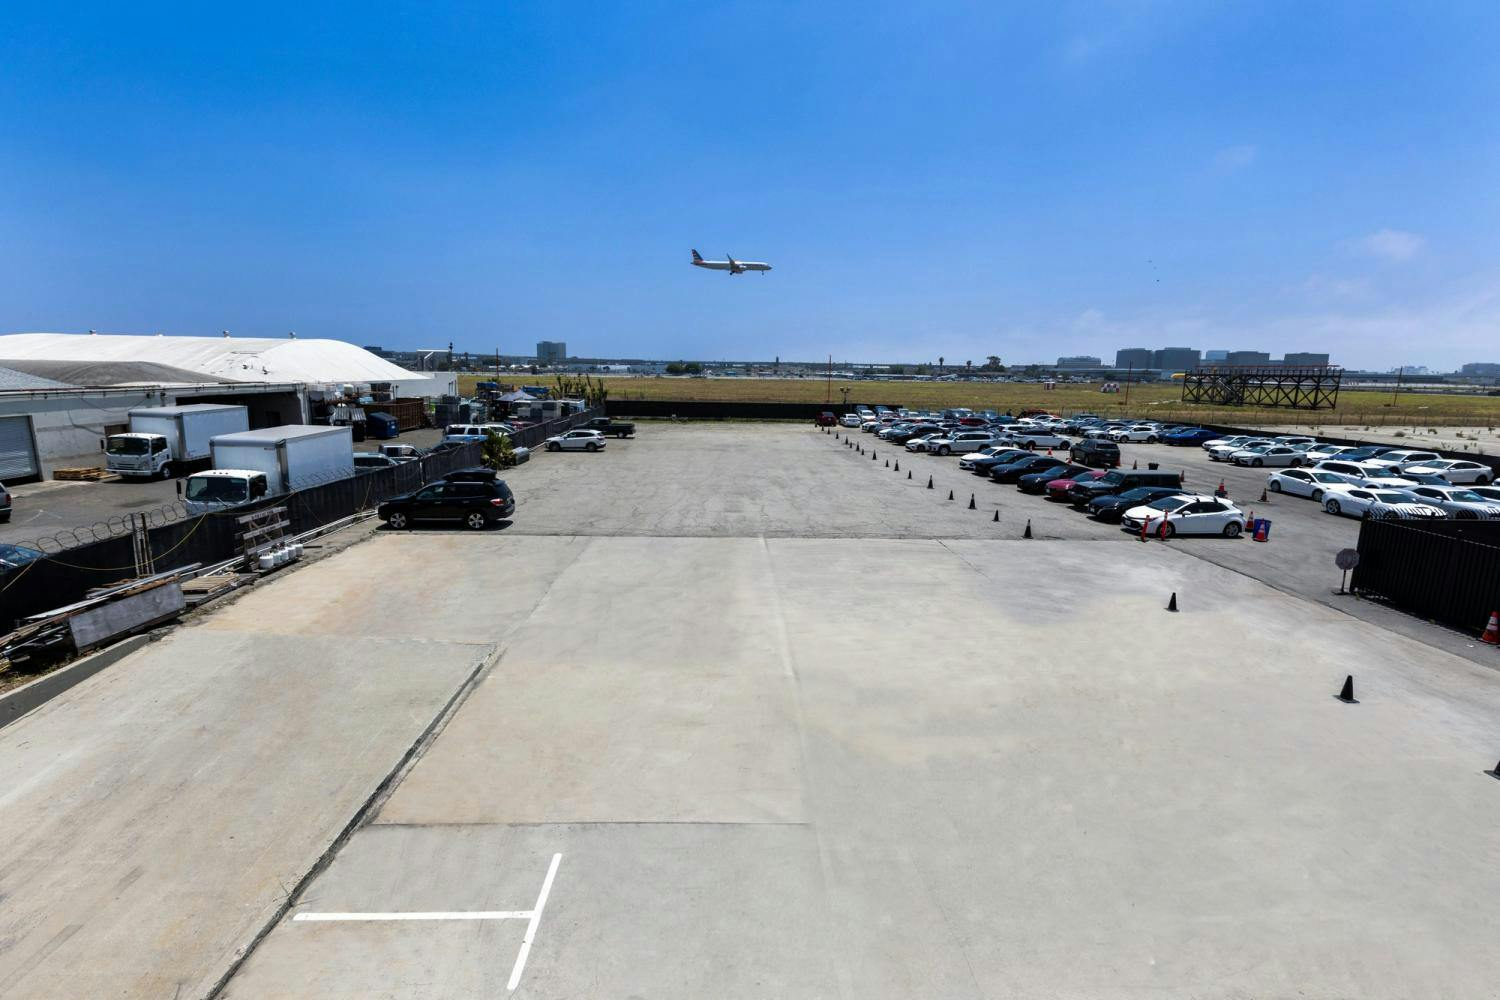 Wide-angle view of a large, open parking area filled with cars and trucks, with an airplane flying overhead near industrial buildings.